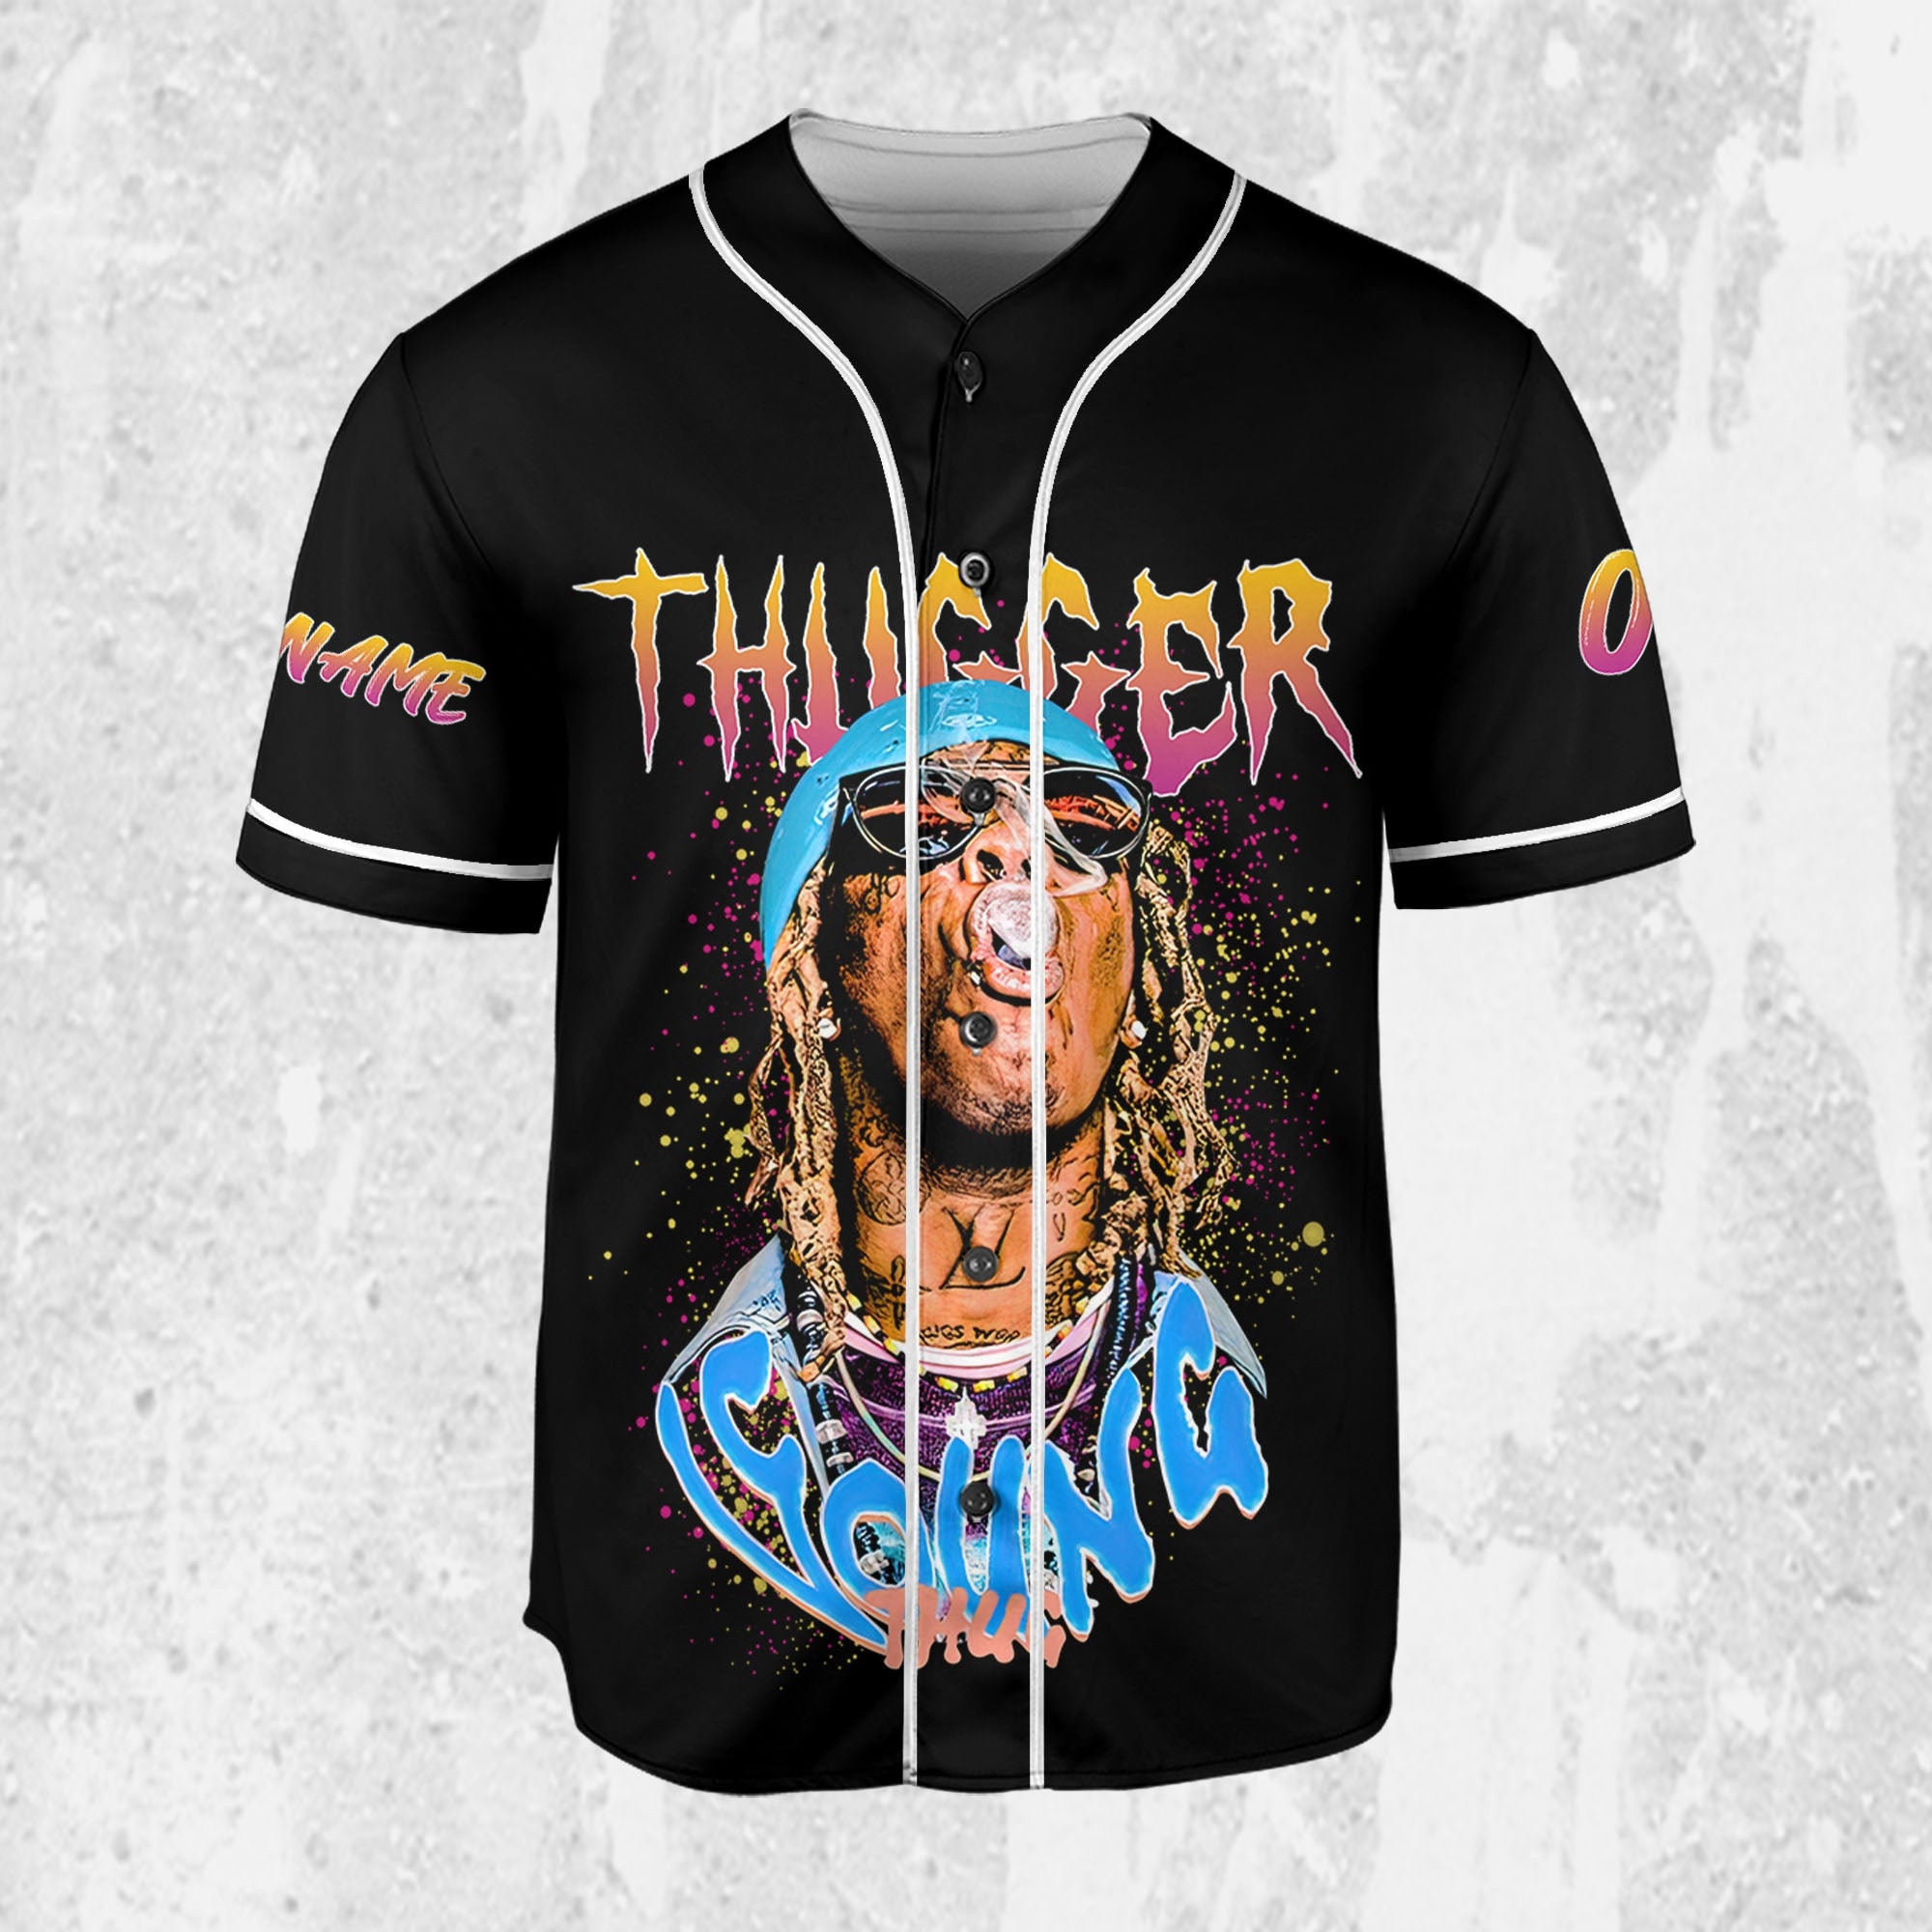 Discover Personalize Young Thug Retro Colorful Jersey, Young Thug Baseball Jersey